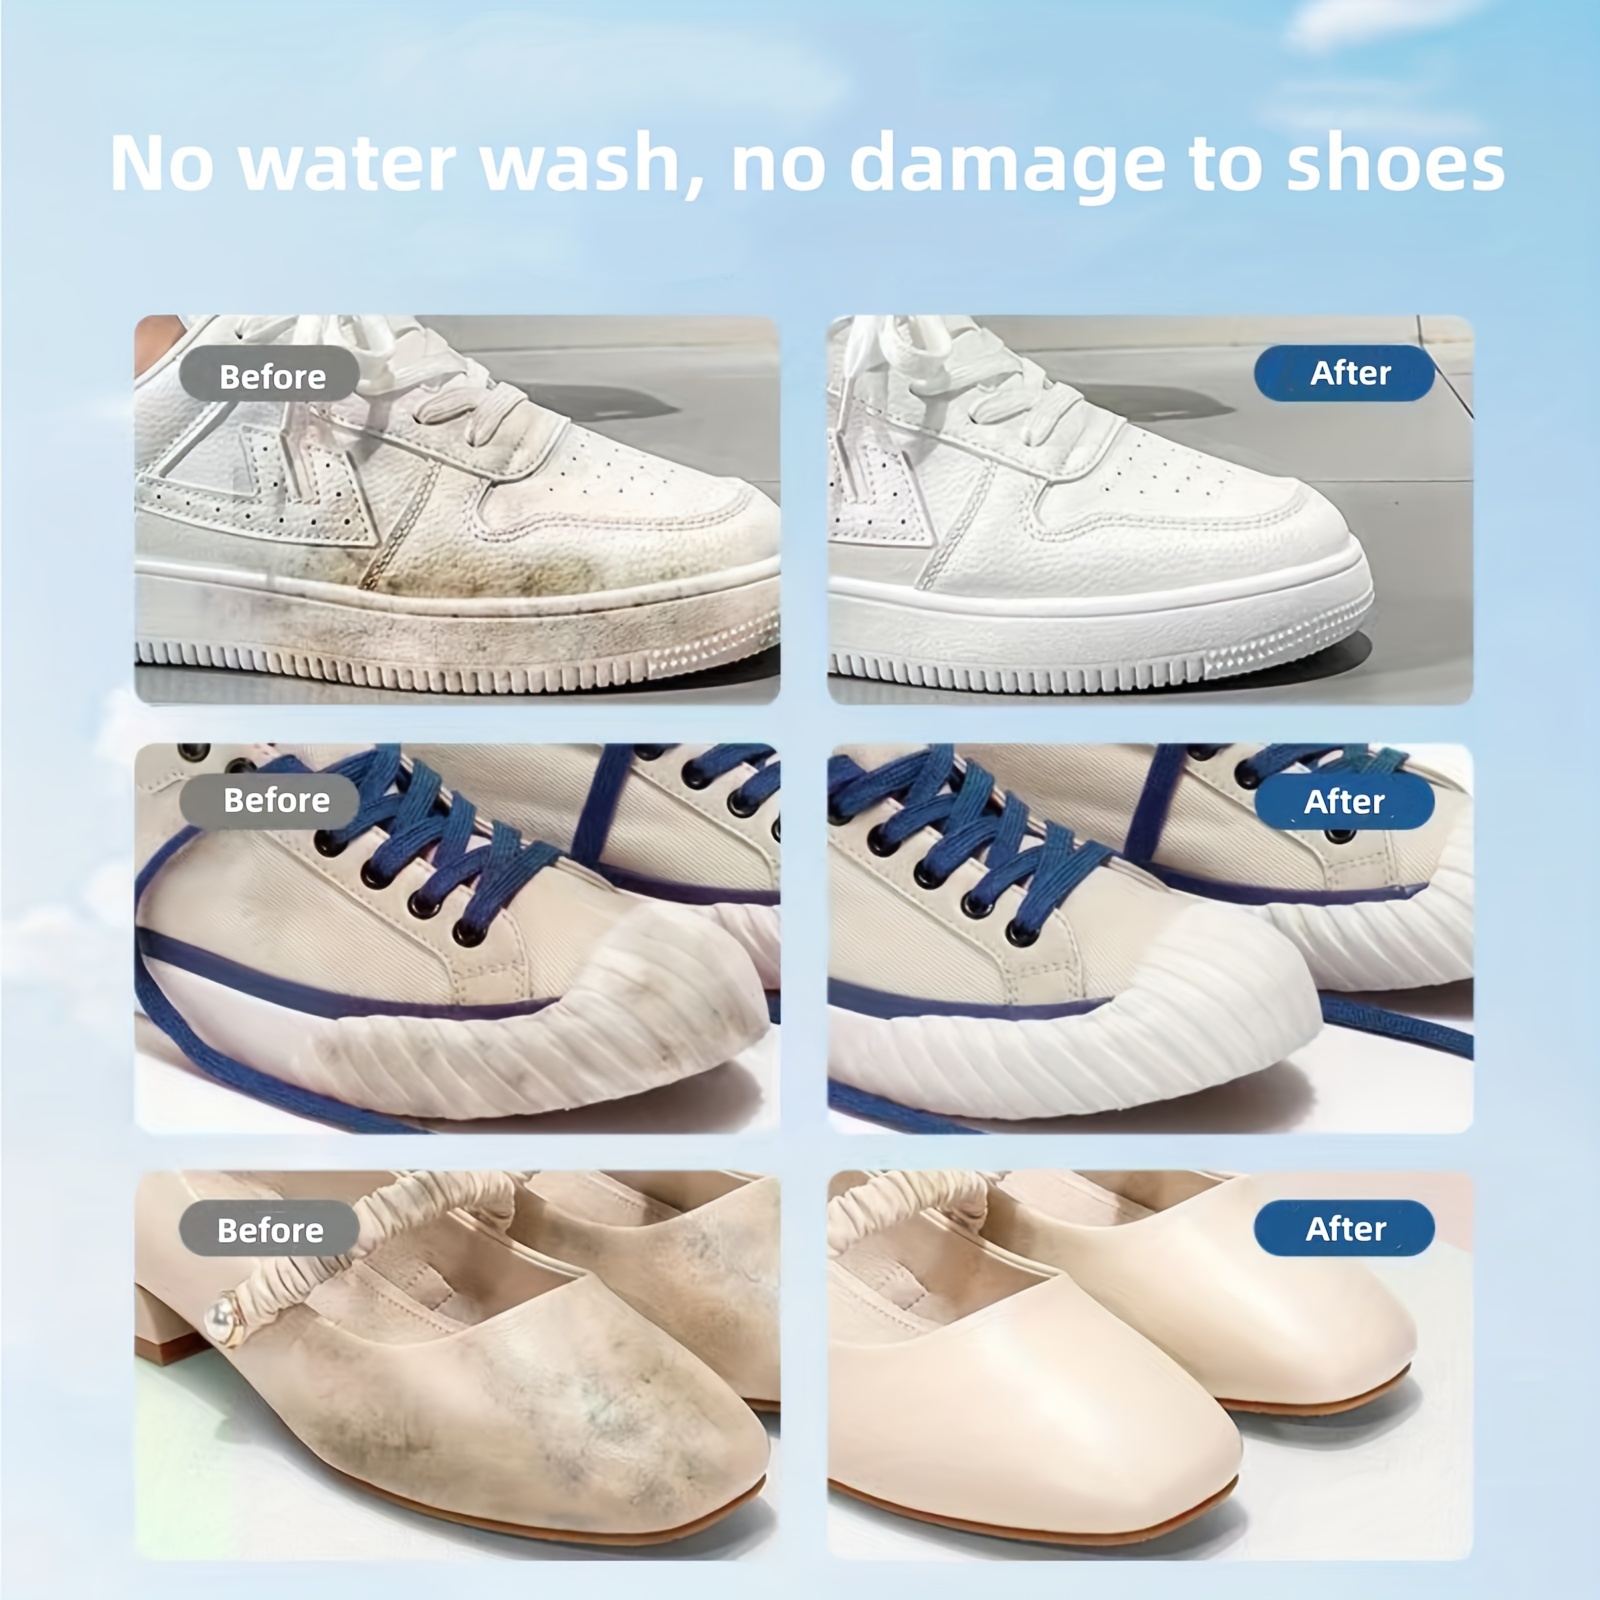 Multipurpose Cleaning Cream, White Shoe Cleaning Cream with Sponge,  Multi-Functional Cleaning and Stain Removal Cream, No Need to Wash 